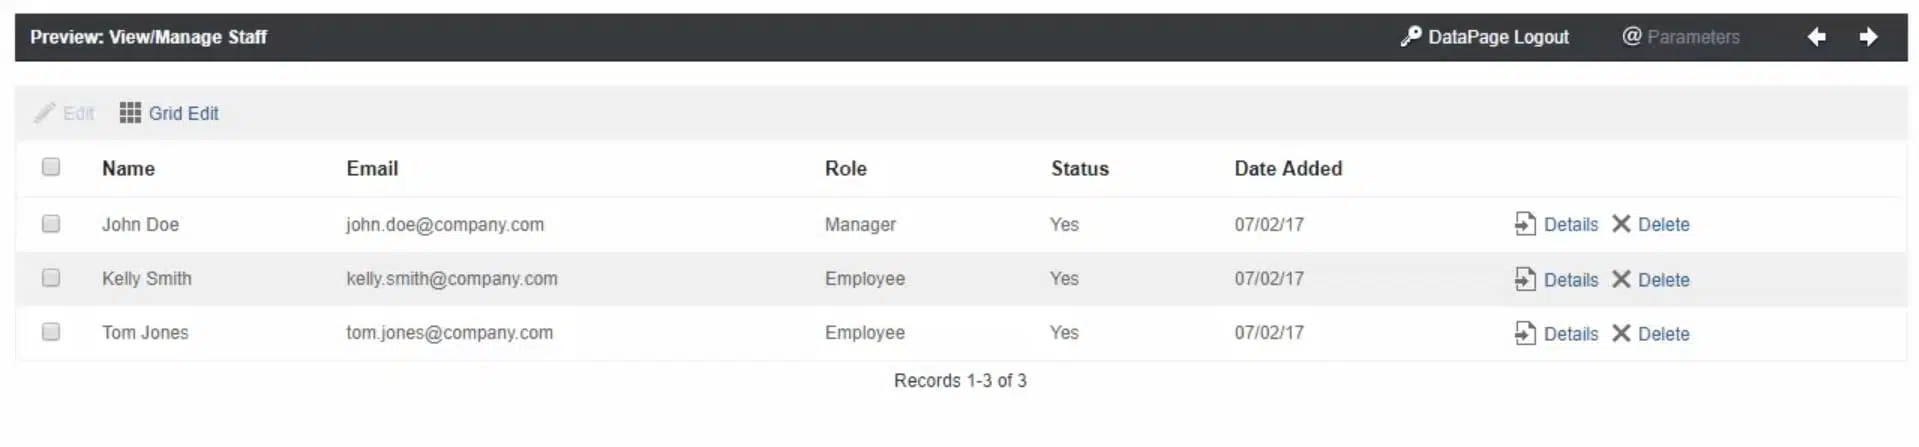 Screenshot of a preview for a sample section titled “View/Manage Staff”. It shows a table containing a list of users.